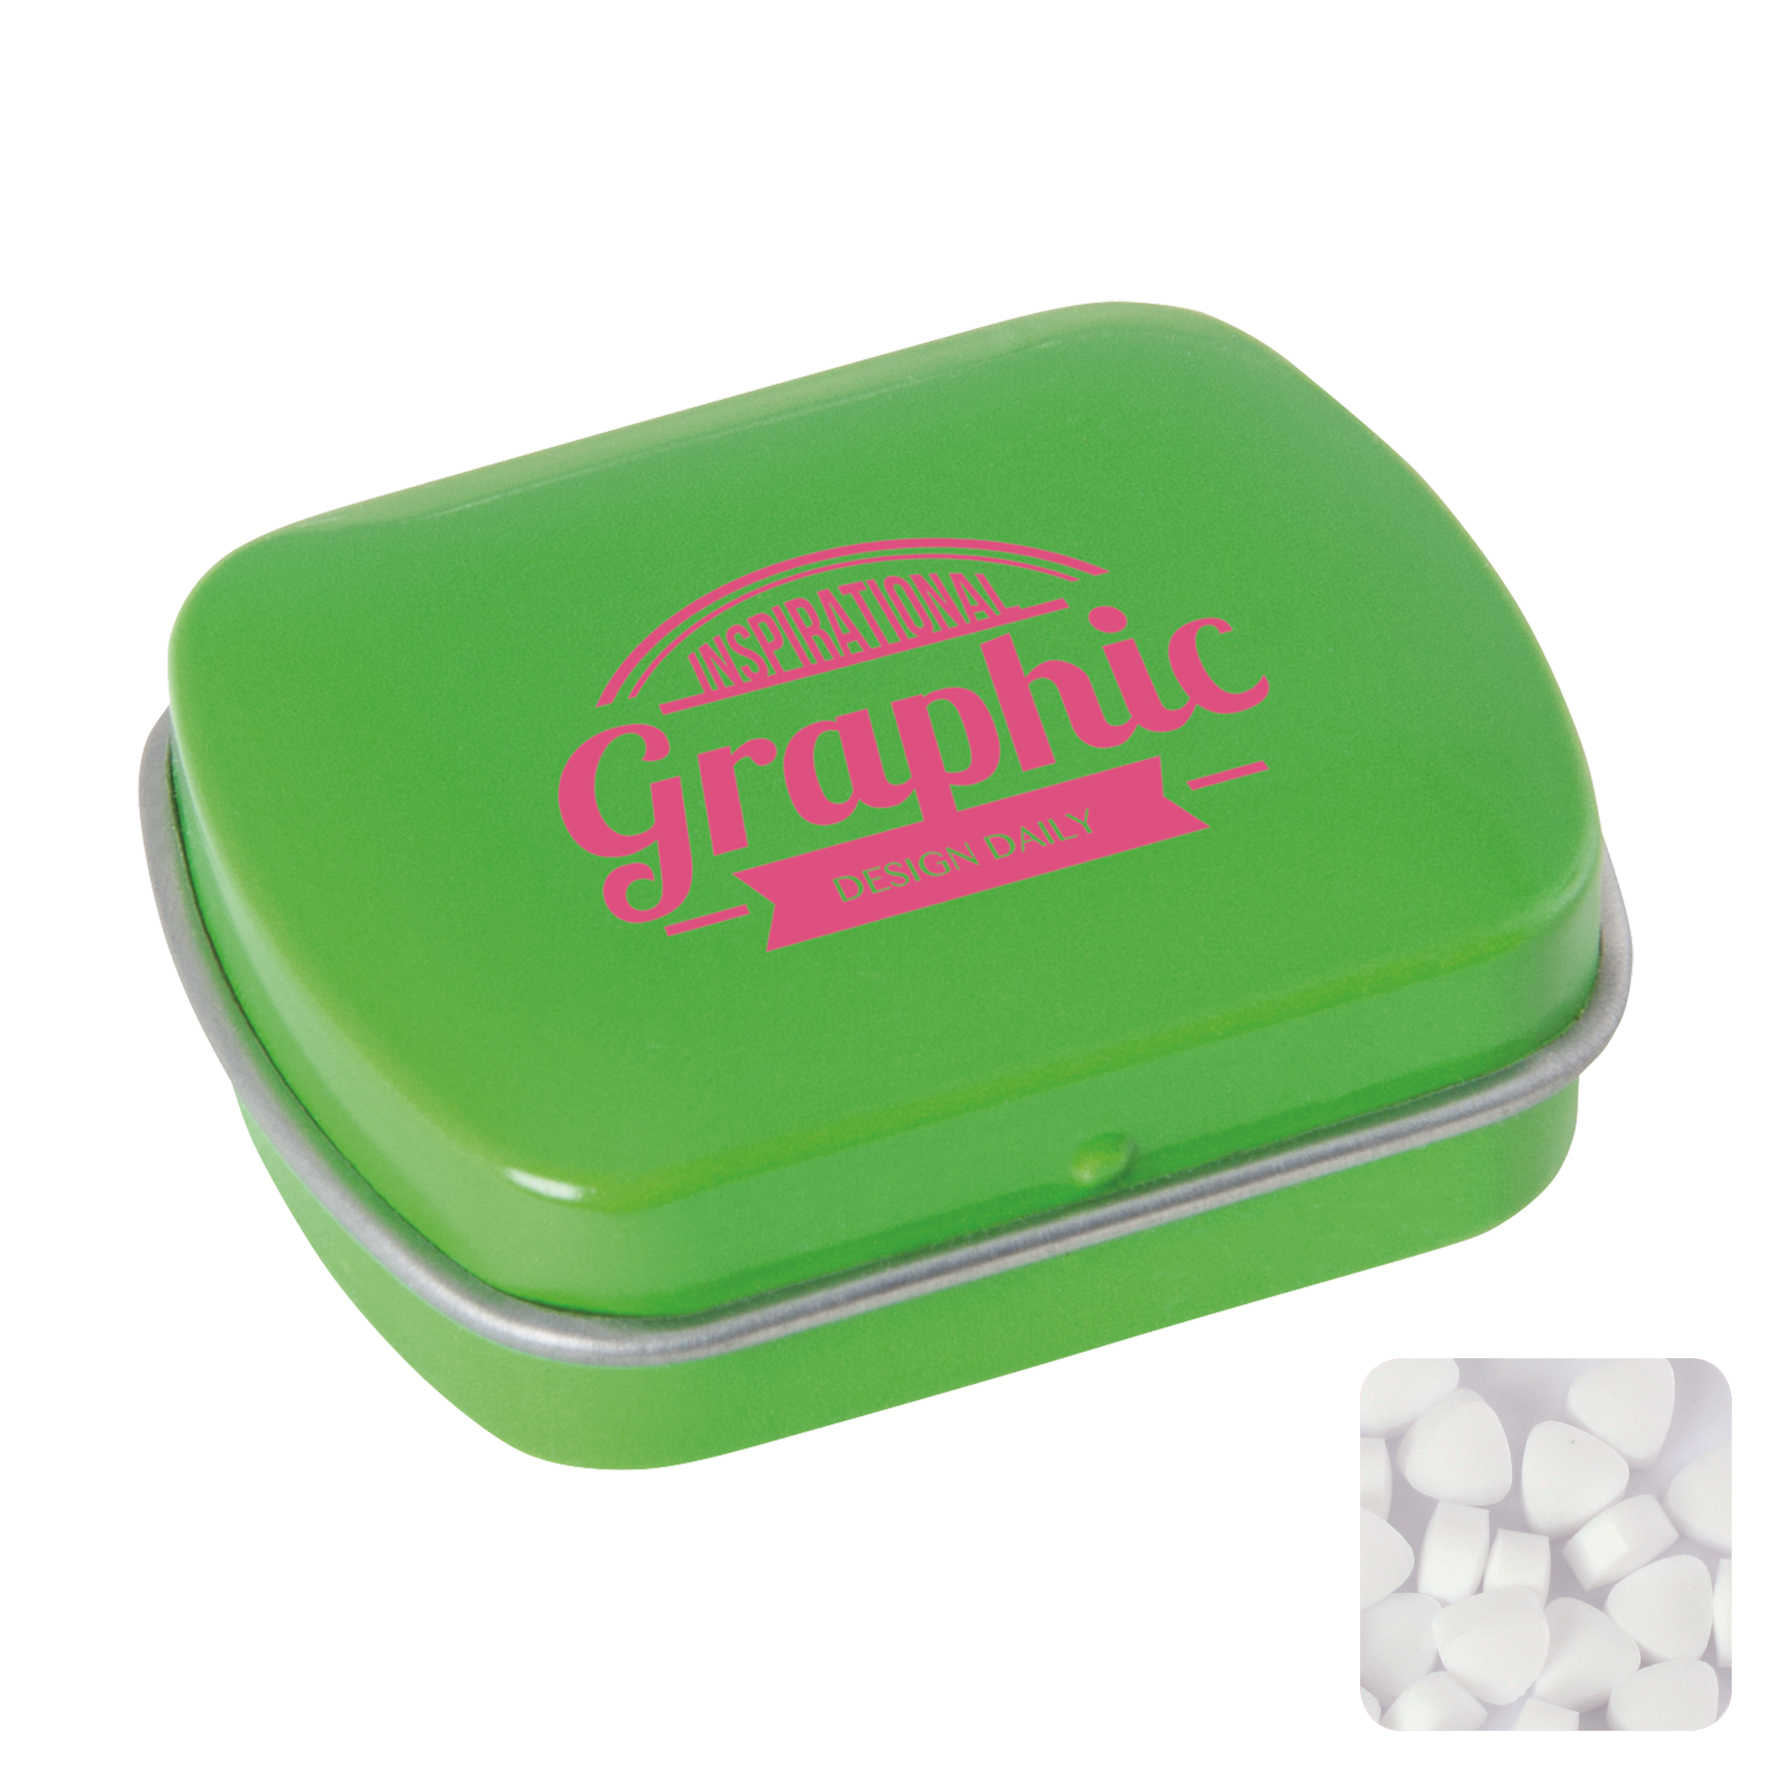 c 0102 29 02 - Mini hinged mint tin with extra strong mints